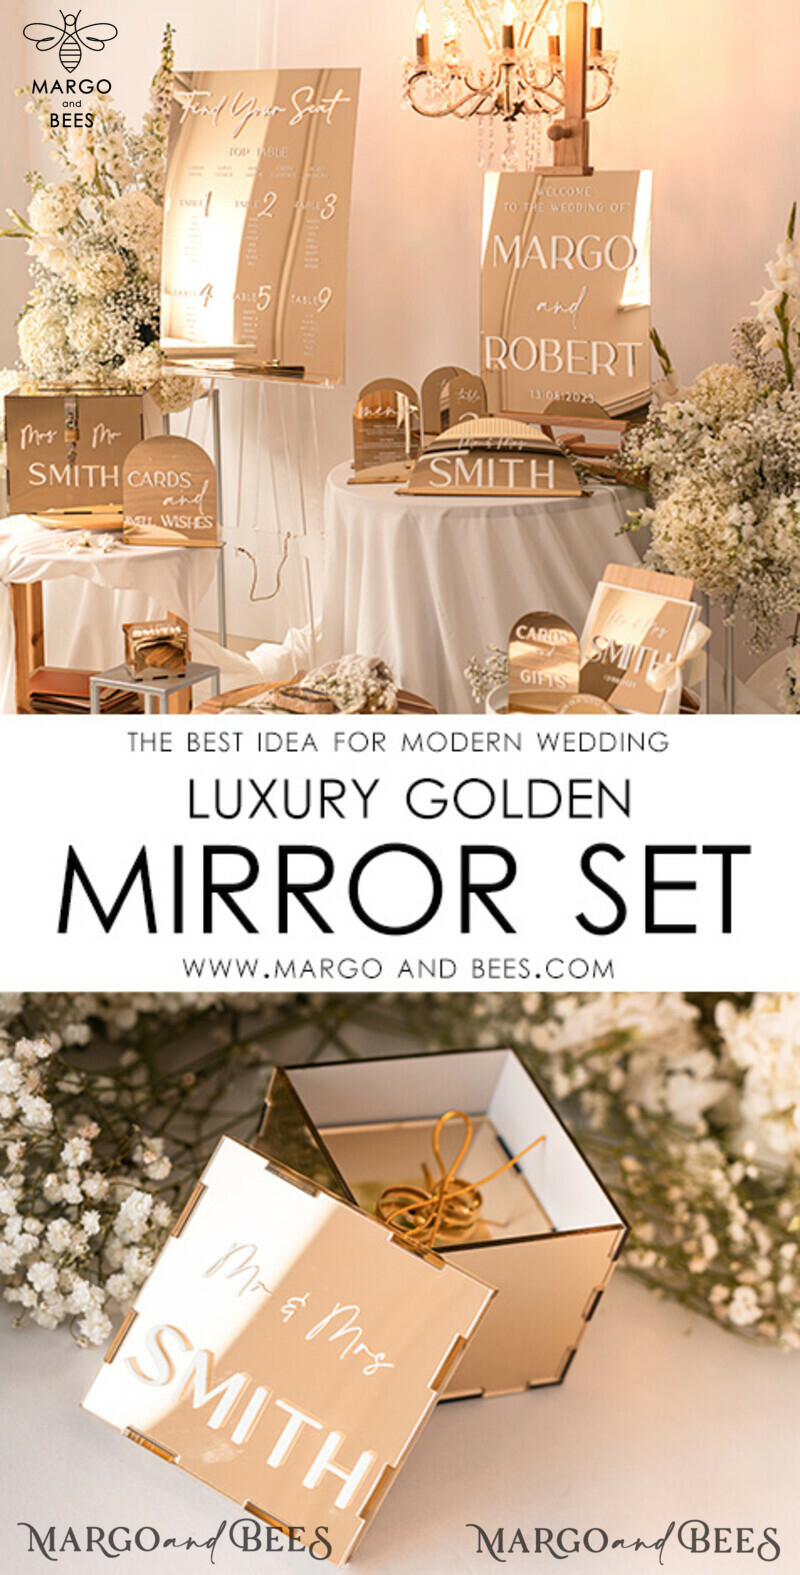 Ring Box for Wedding Ceremony 3 rings, mirror Acrylic Golden Wedding Ring Box for ceremony, Boho Glam Wedding Ring Boxes, Luxury Acrylic Gold Ring box double Custom Colors-6